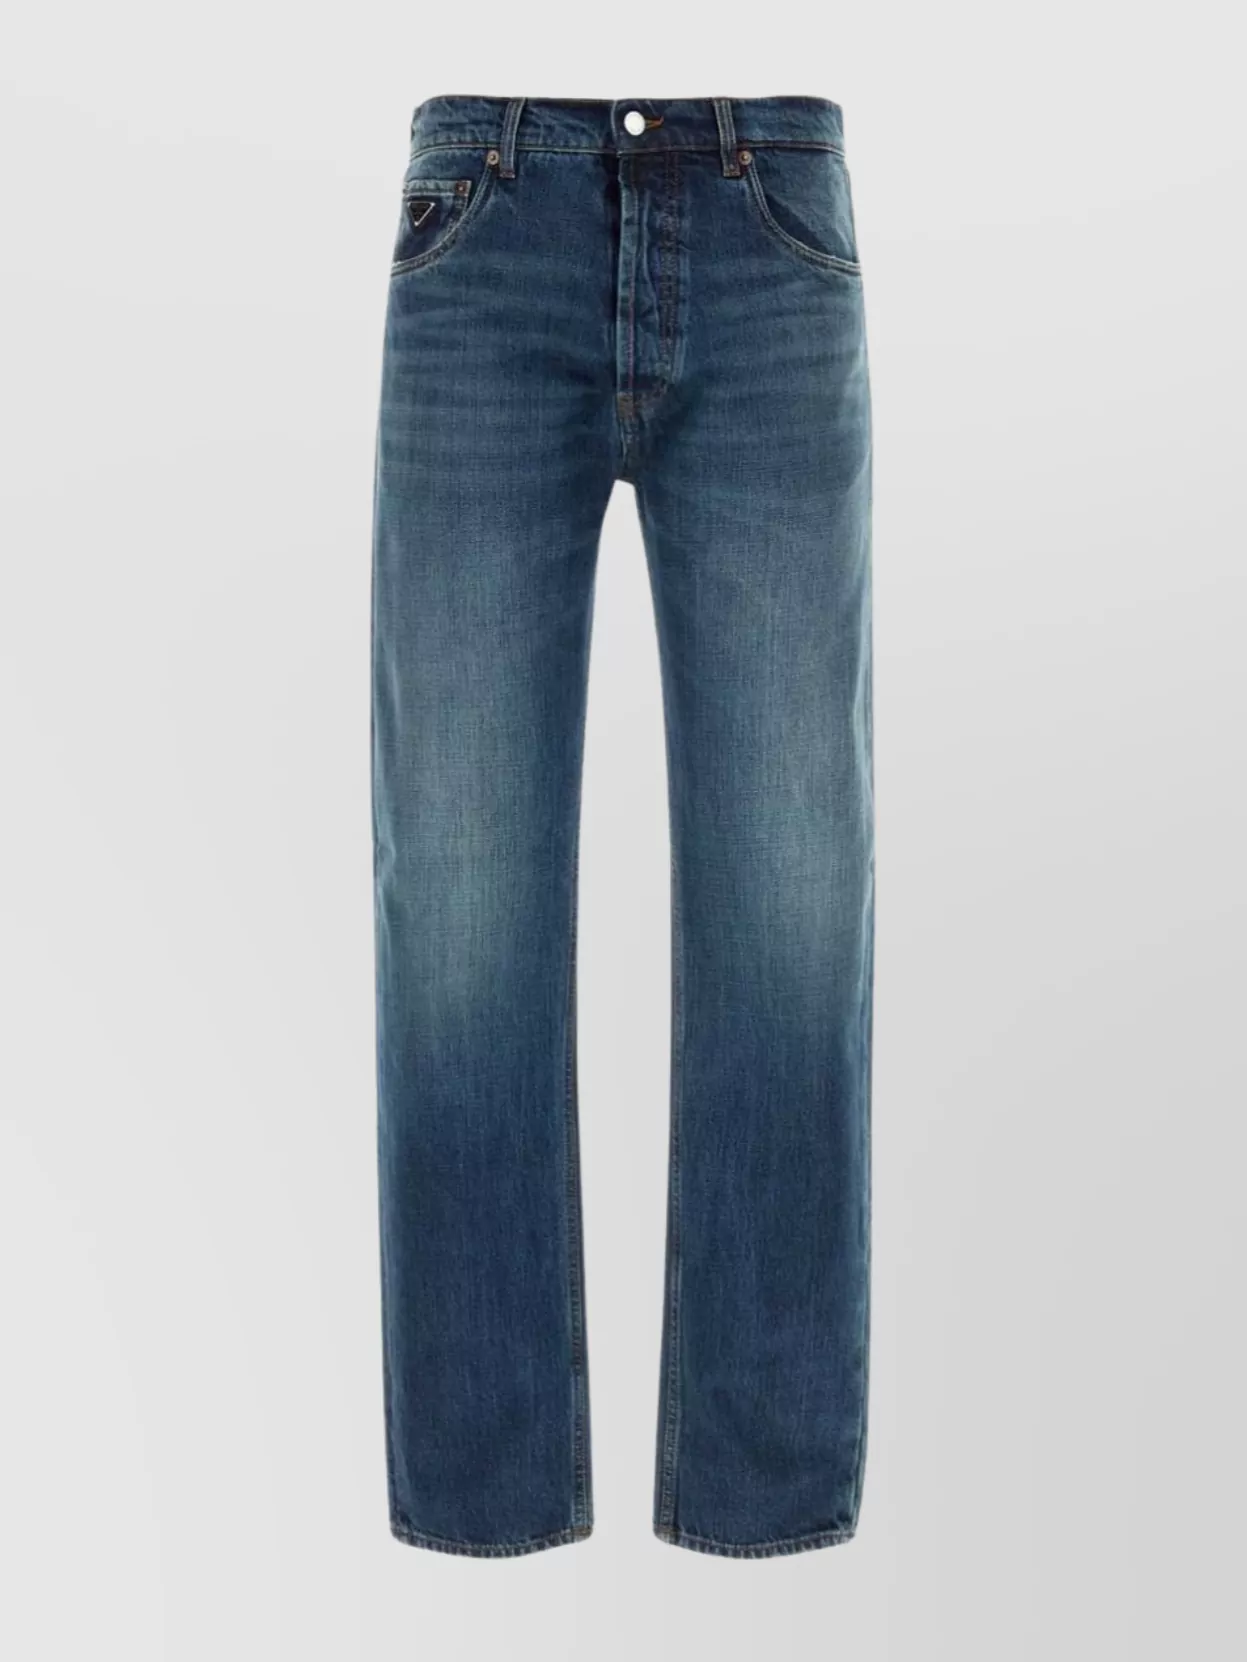 Shop Prada Denim Jeans With Belt Loops And Contrast Stitching In Blue